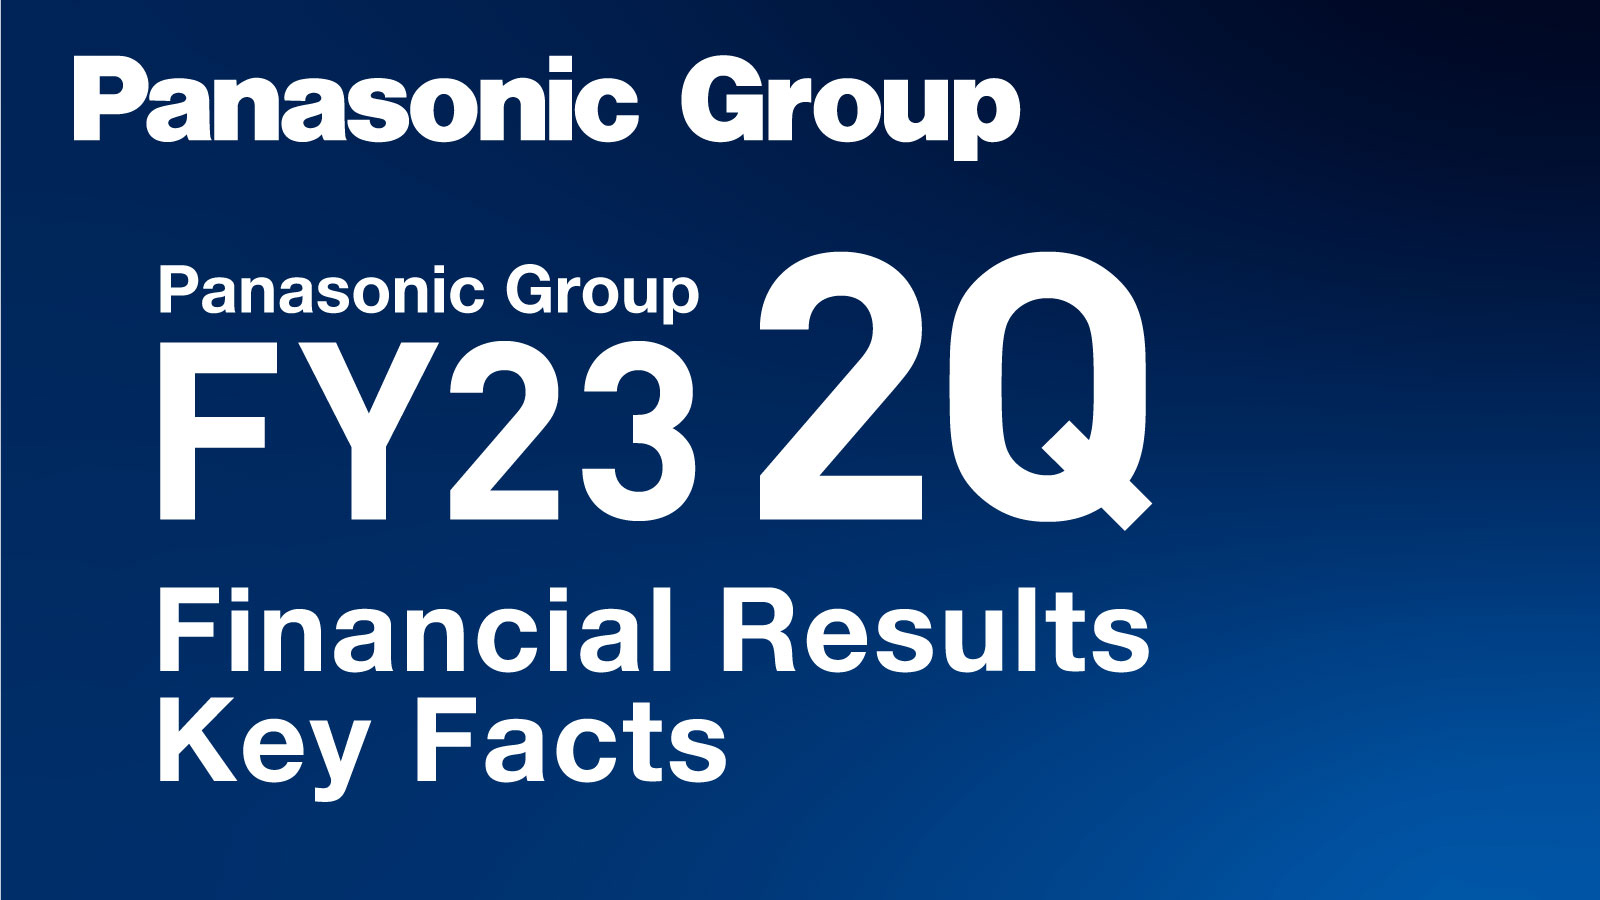 Panasonic Group FY23 2Q Financial Results Key Facts